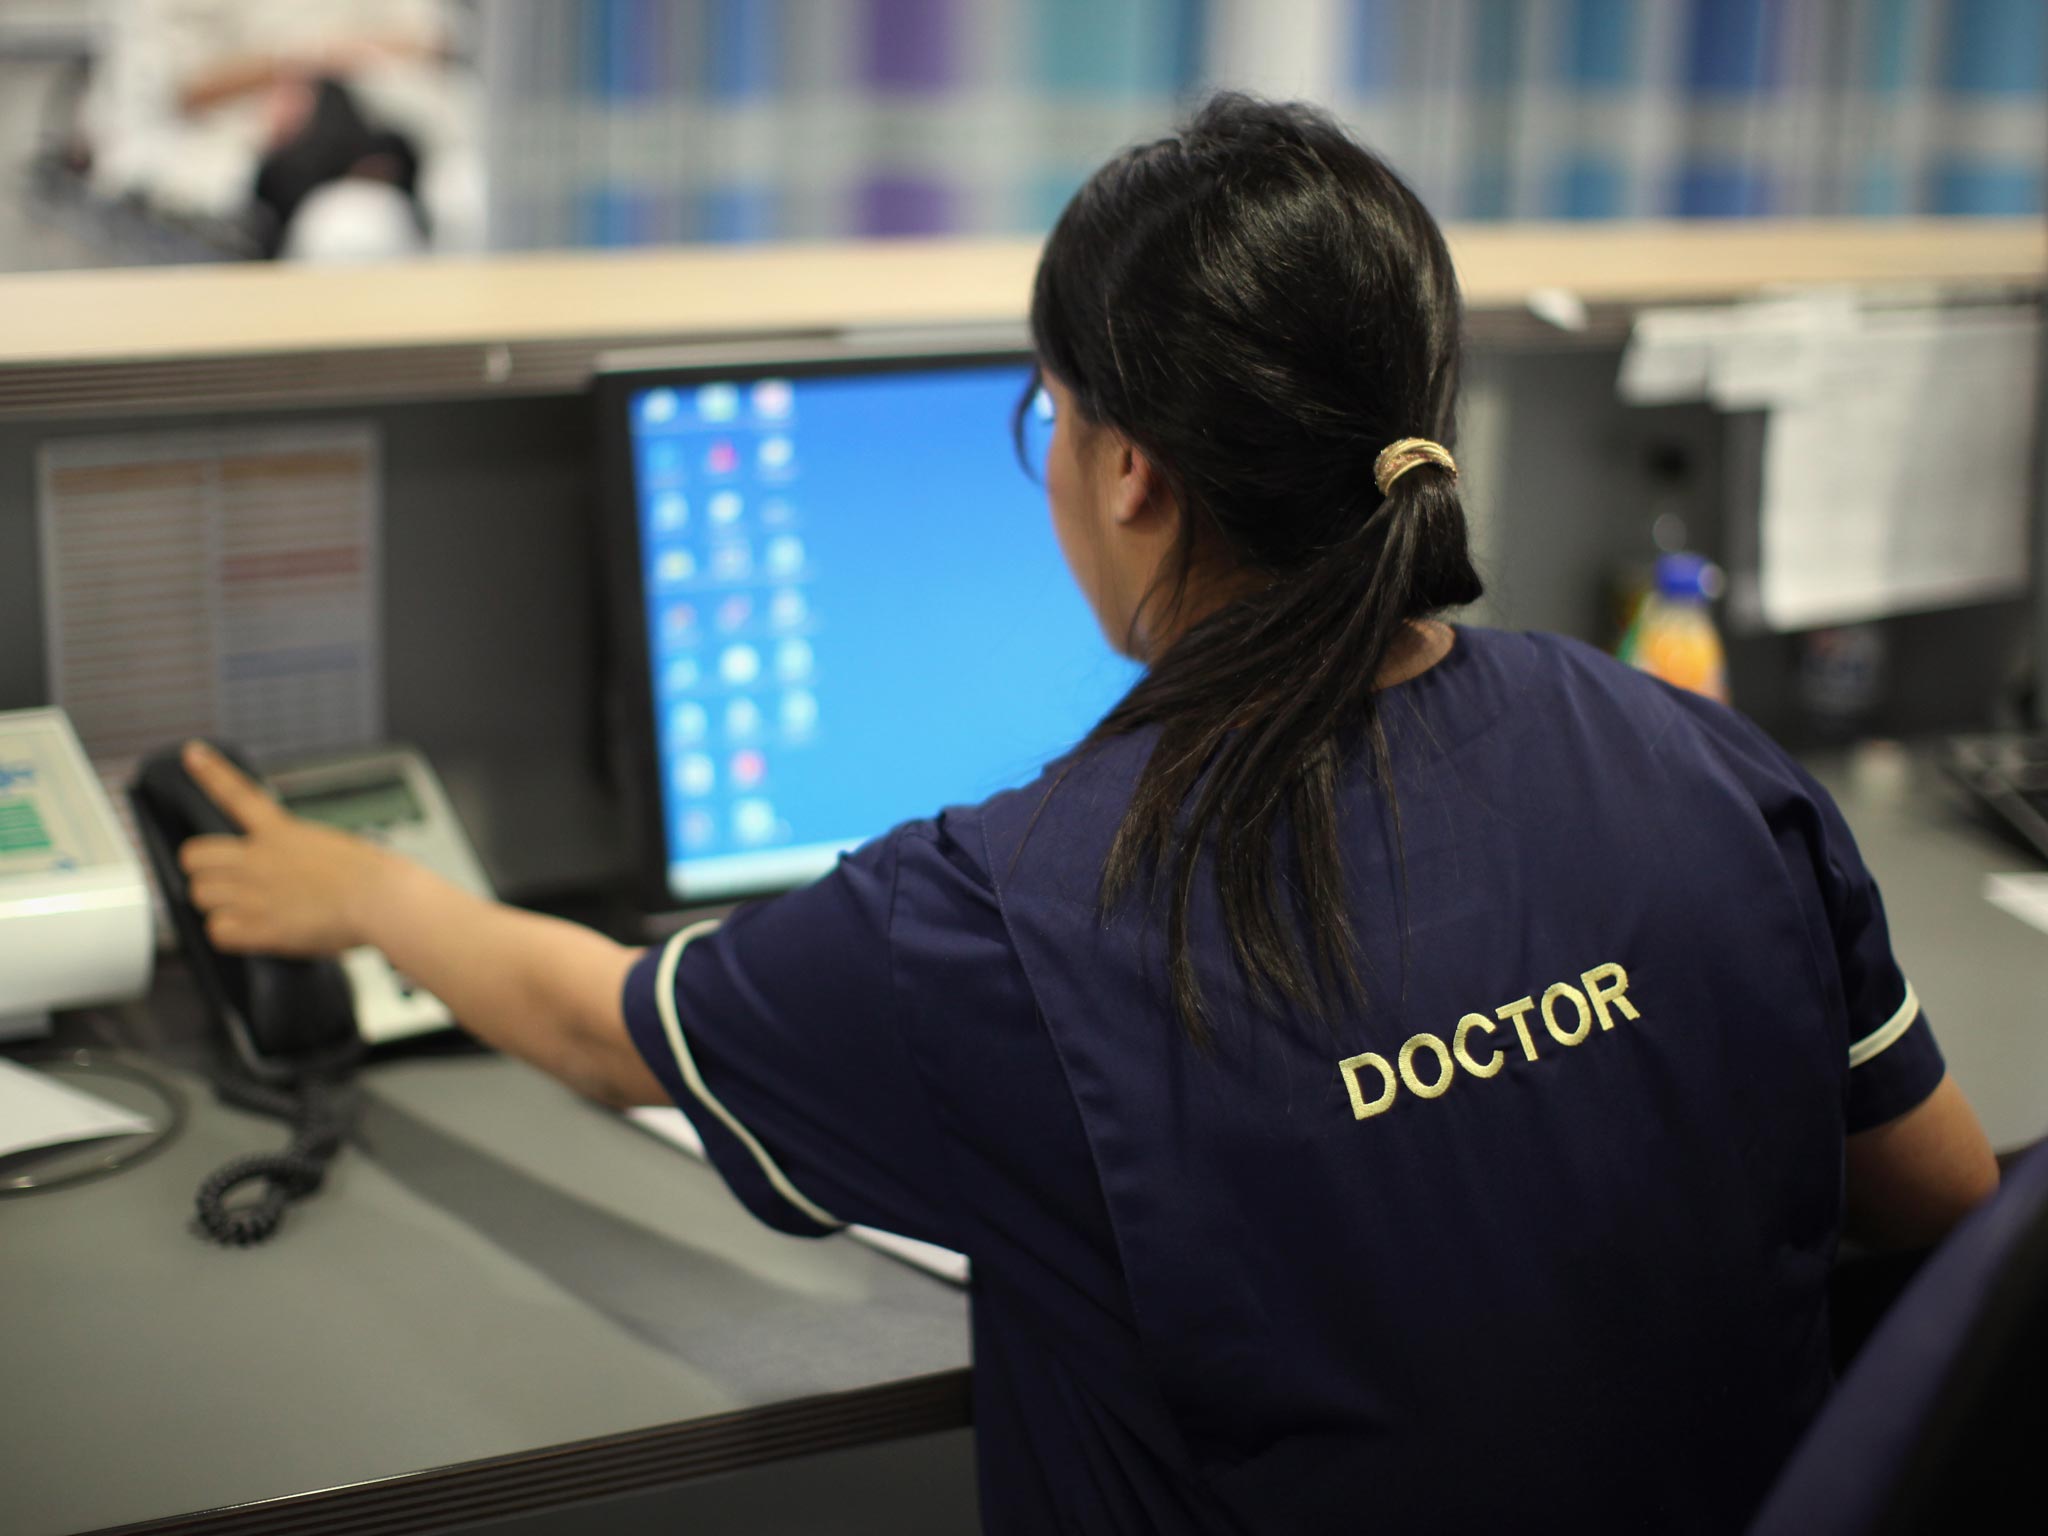 The Care Quality Commission has said that people are waiting too long in outpatient units in NHS hospitals